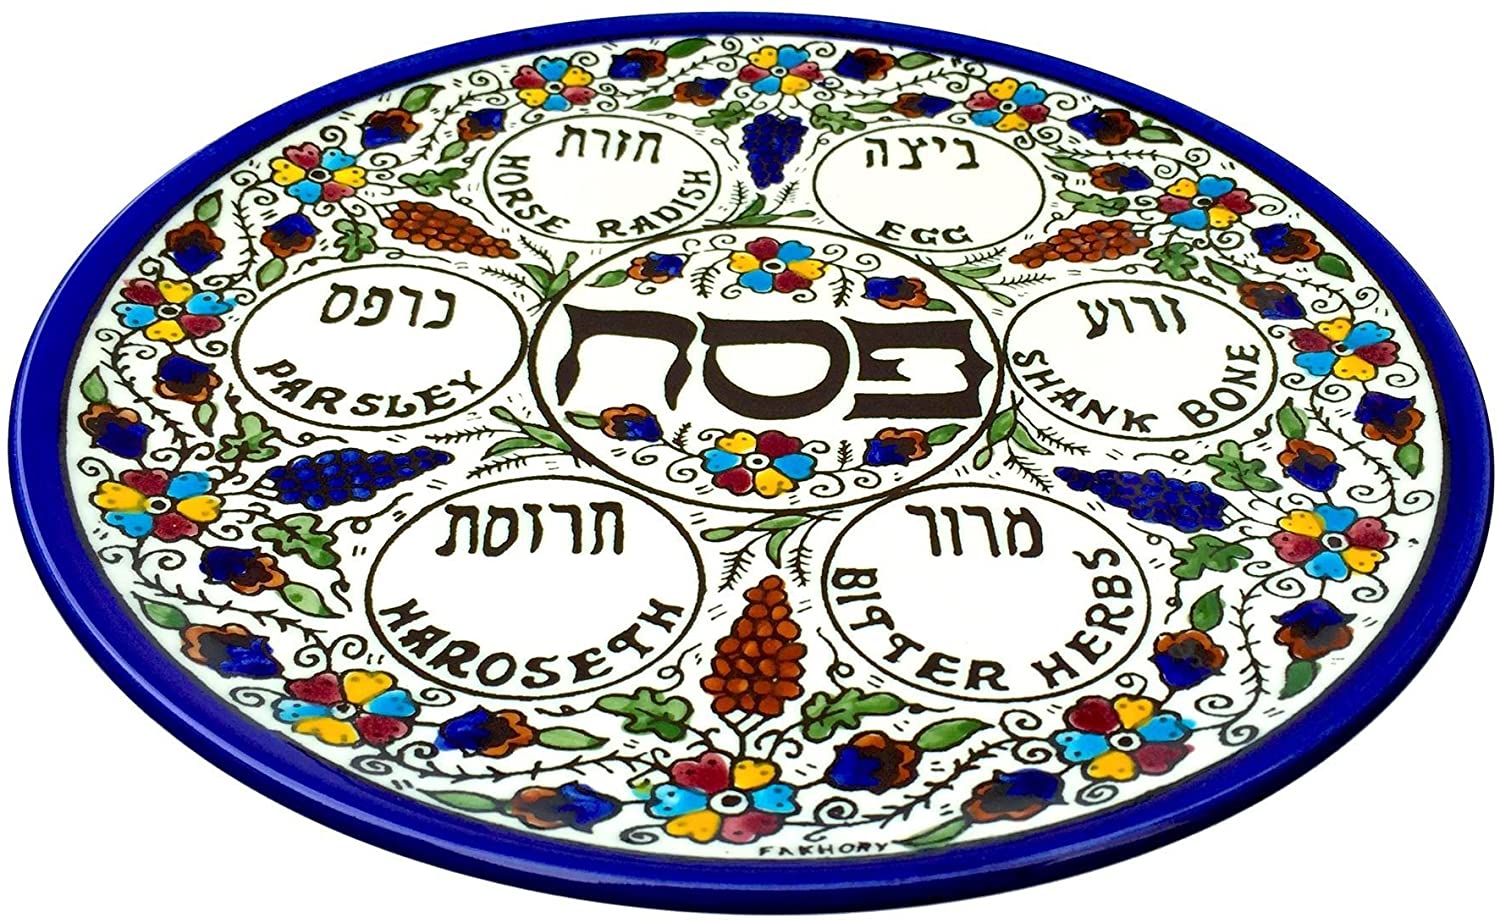 Seder Plate Bluenoemi Plate Bluenoemi Armenian Ceramics Pessach Plate for Passover Jewish Table with small dishes